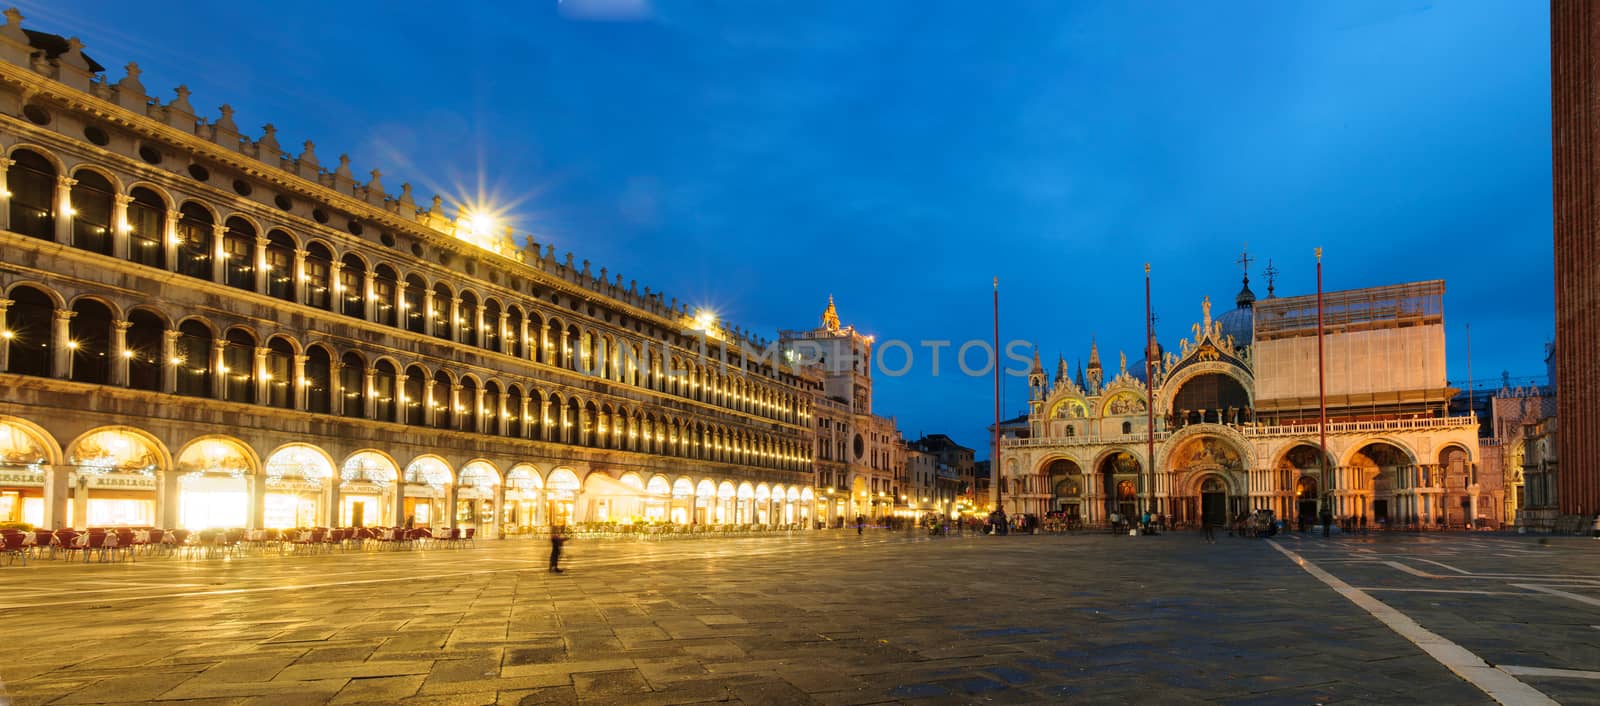 VENICE, ITALY - FEB 04, 2015: Night scene of the Piazza San Marco, with local and tourists, in Venice, Veneto, Italy